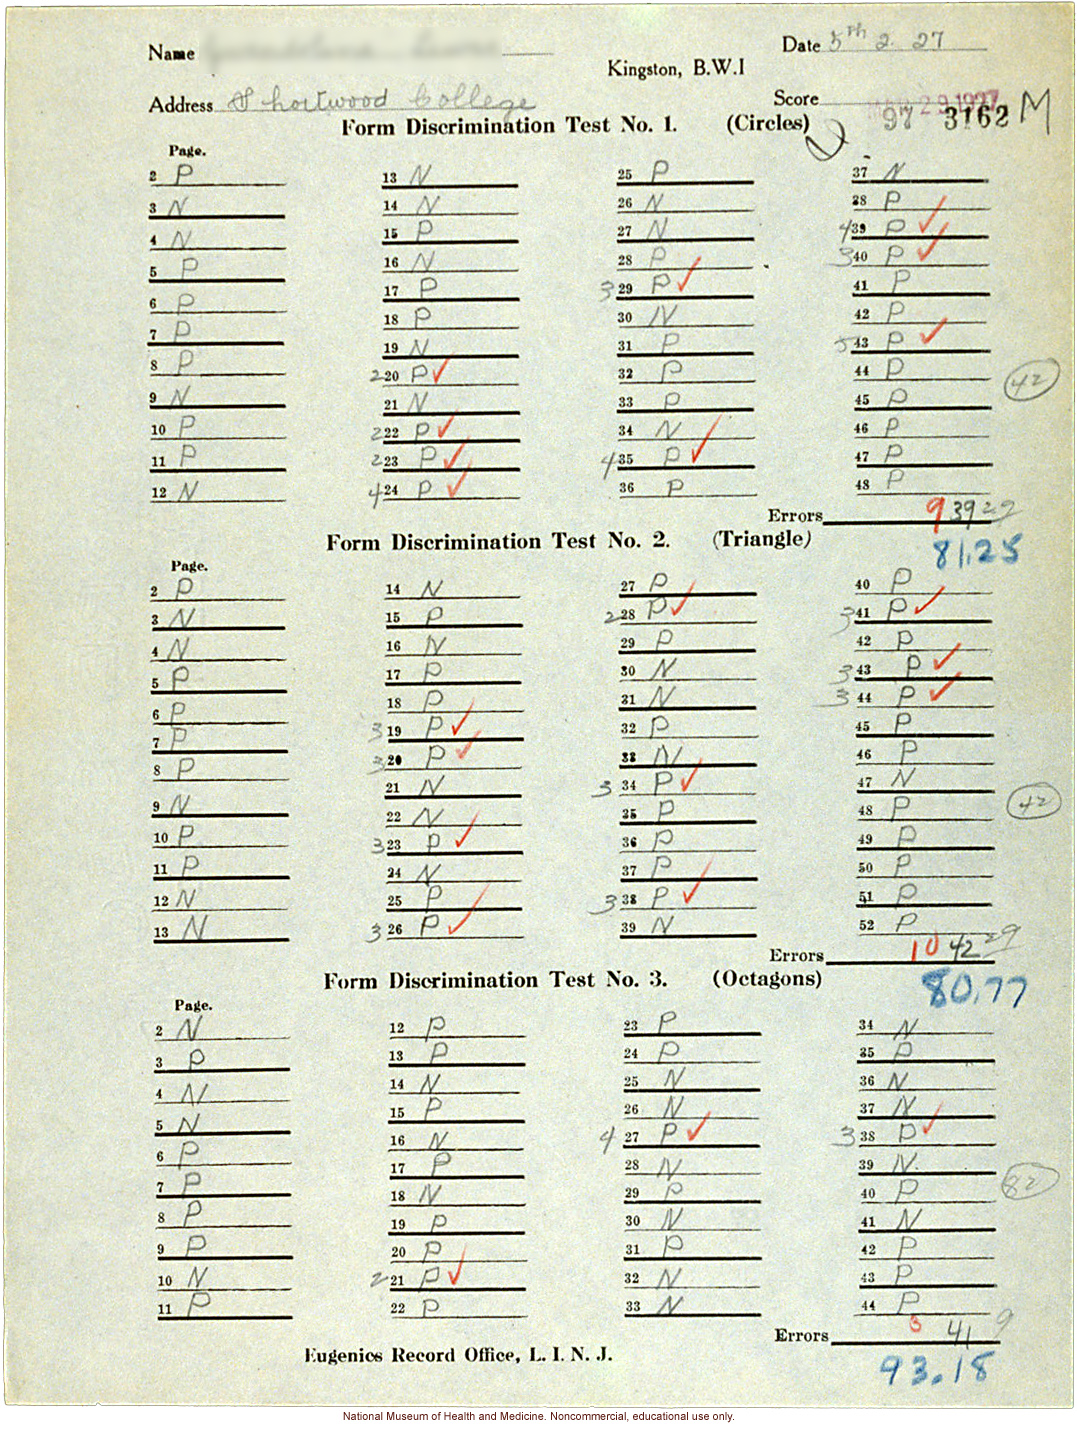 Shortwood College anthropometric case: &quote;Form Discrimination Test,&quote; conducted by Morris Steggerda for <i>Race Crossing in Jamaica</i>